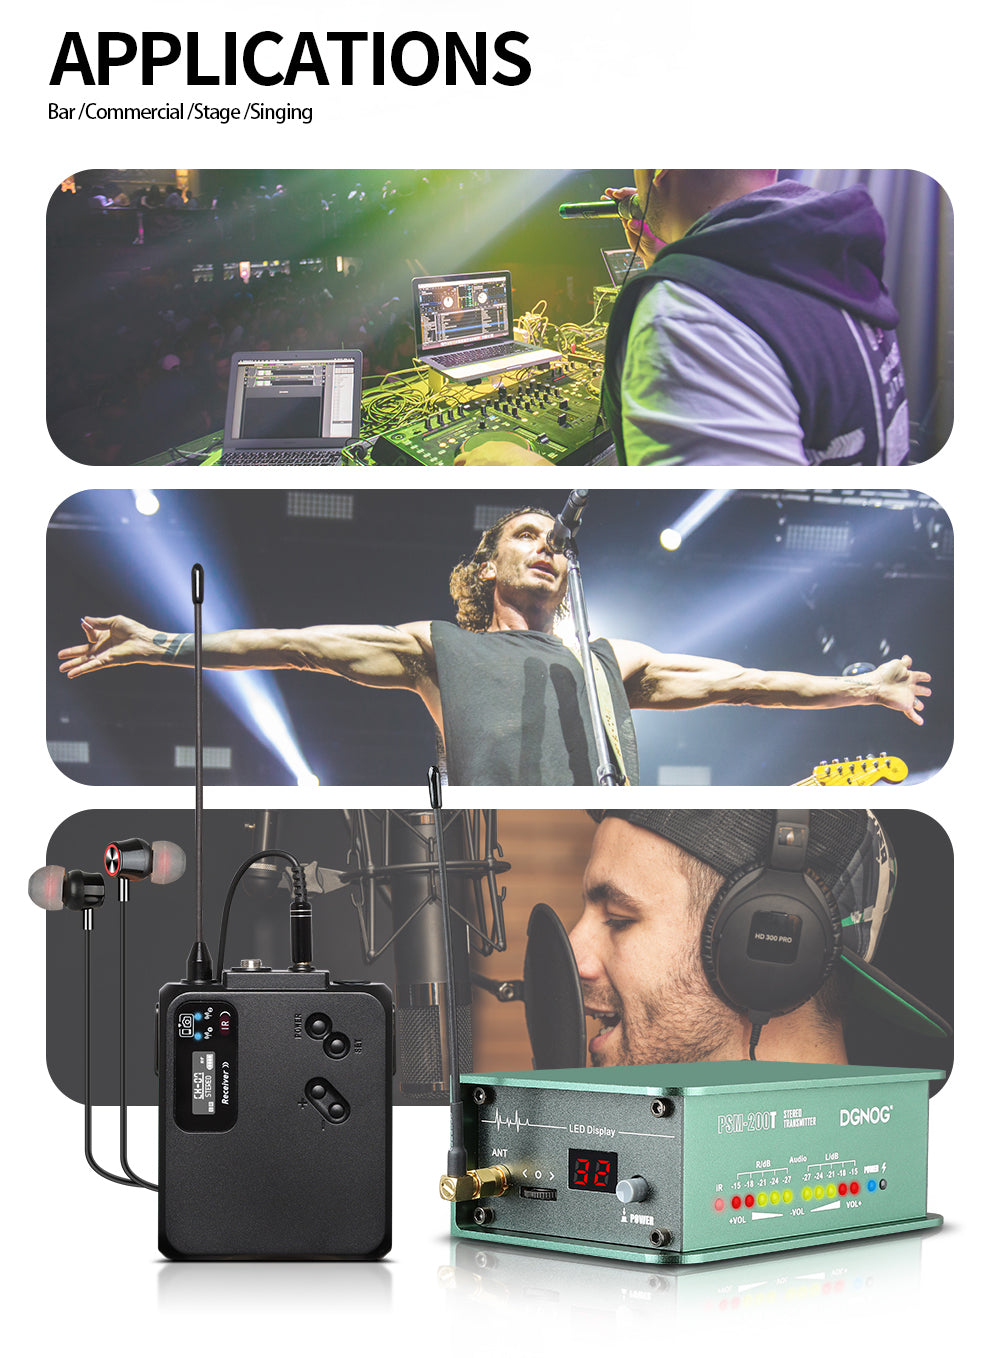 DGNOG PSM-200T UHF Wireless Stereo Monitor System Equipped with lithium battery, suitable for outdoor stage performance.